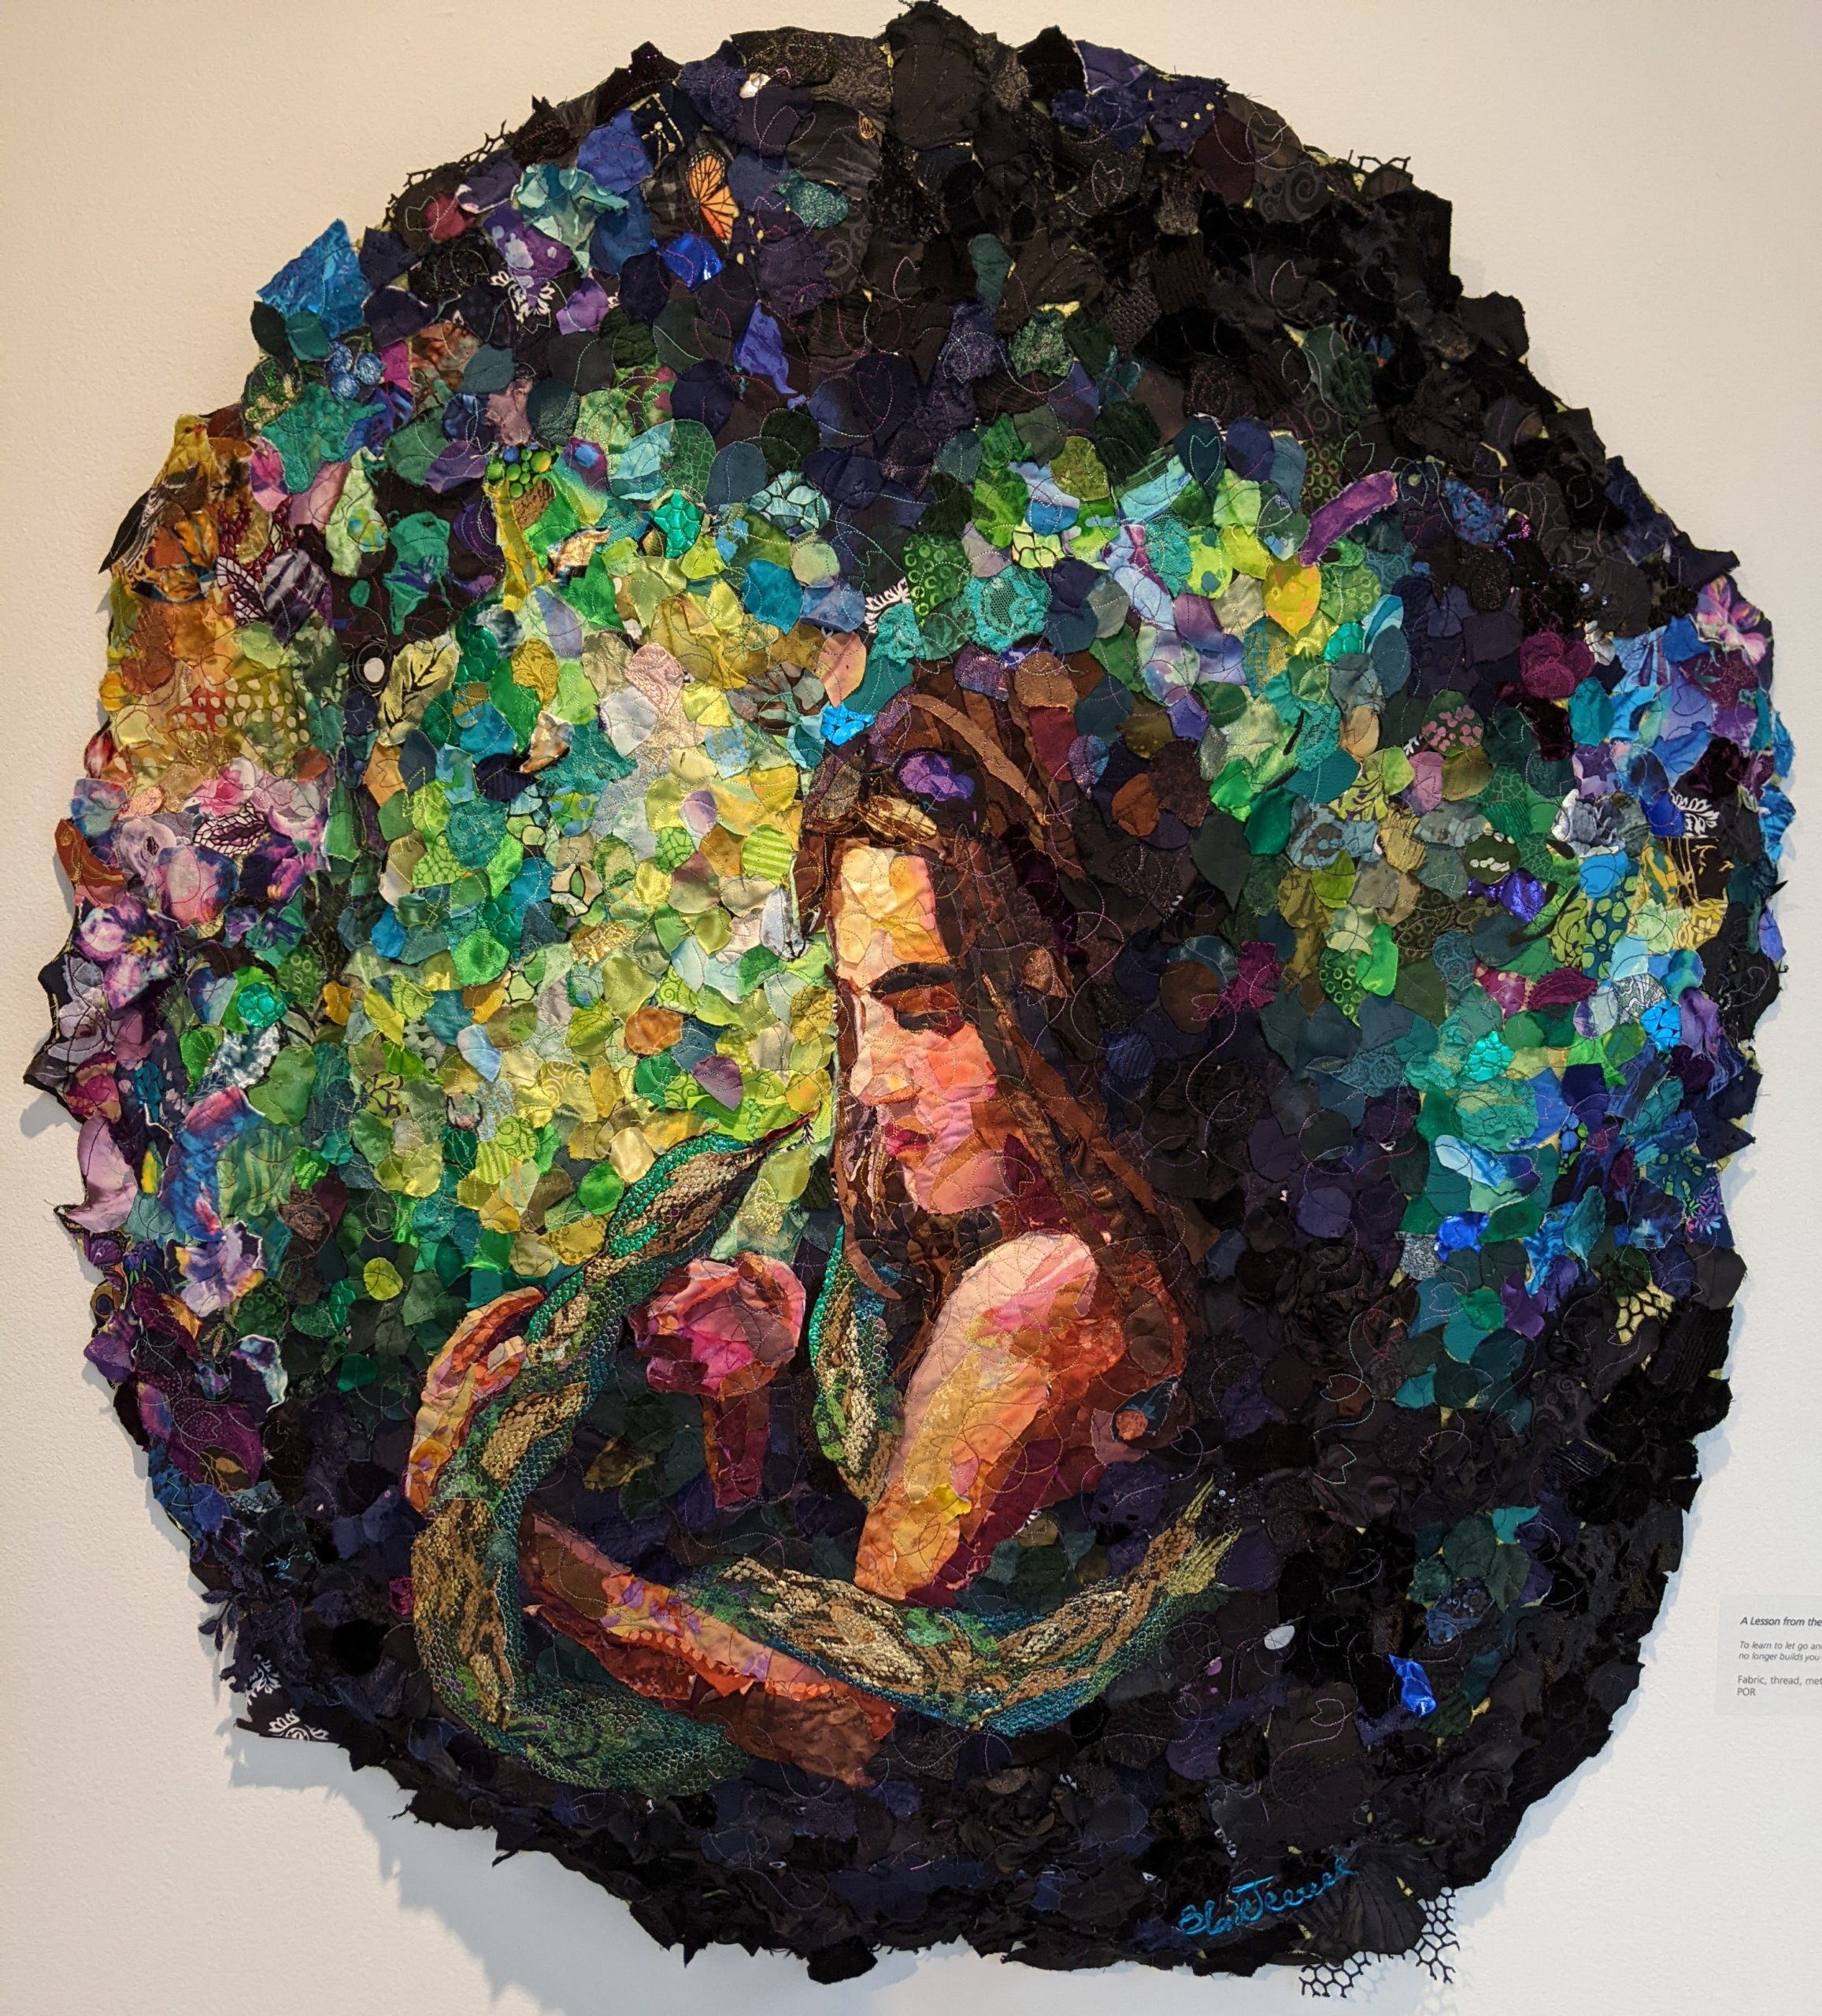 This large, circular piece of textile art shows a young woman with a snake wrapped around her arm.